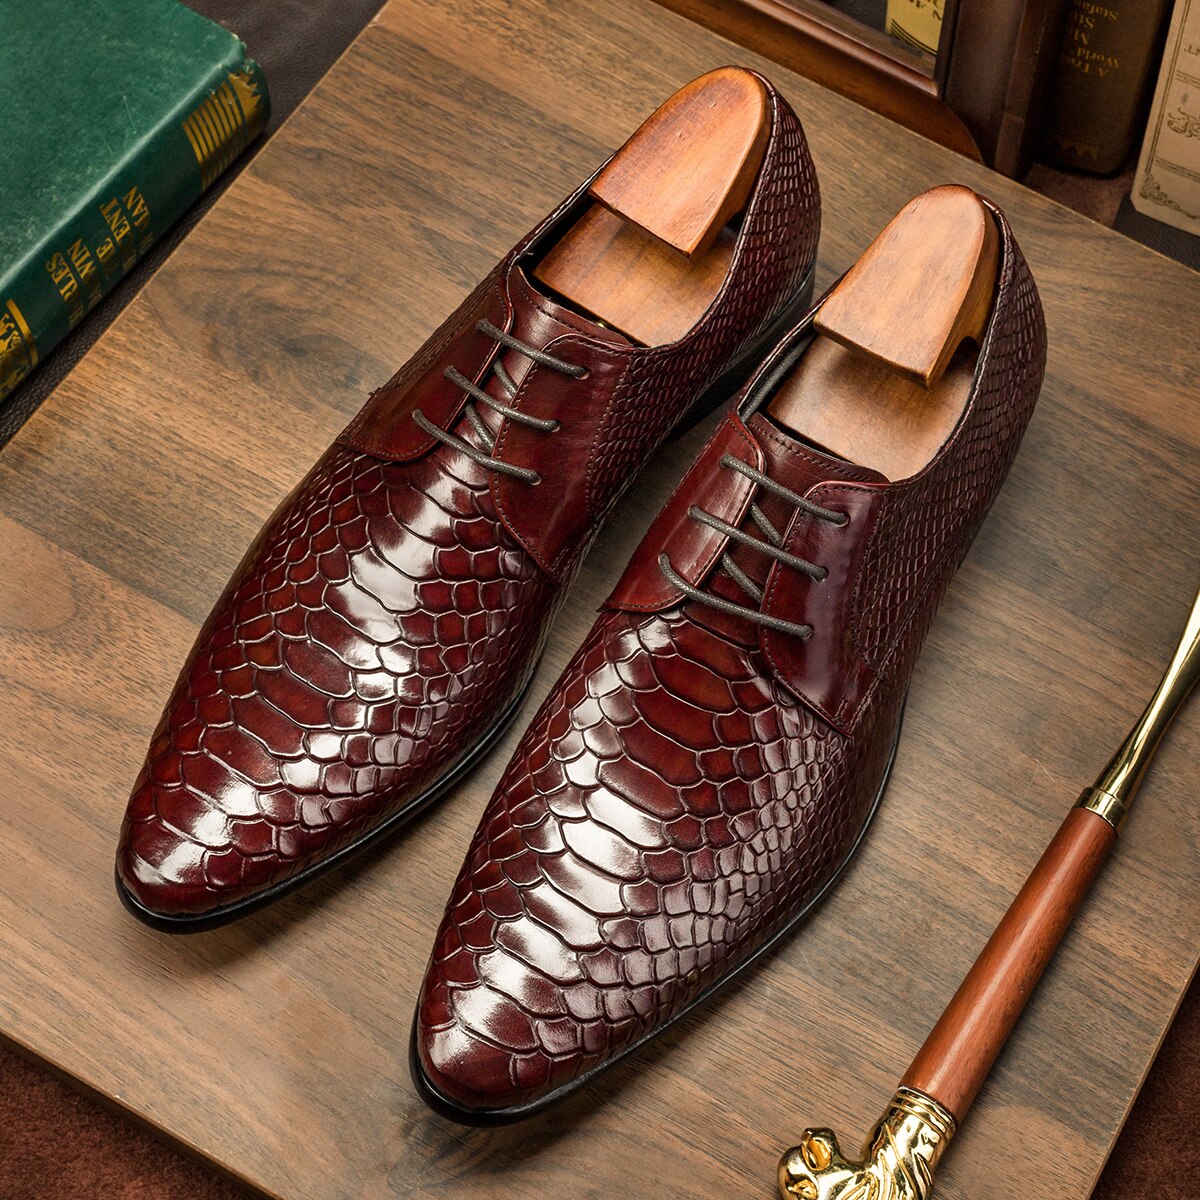 Mens Dress Shoes Luxury Handmade Professional Formal Derby Shoes